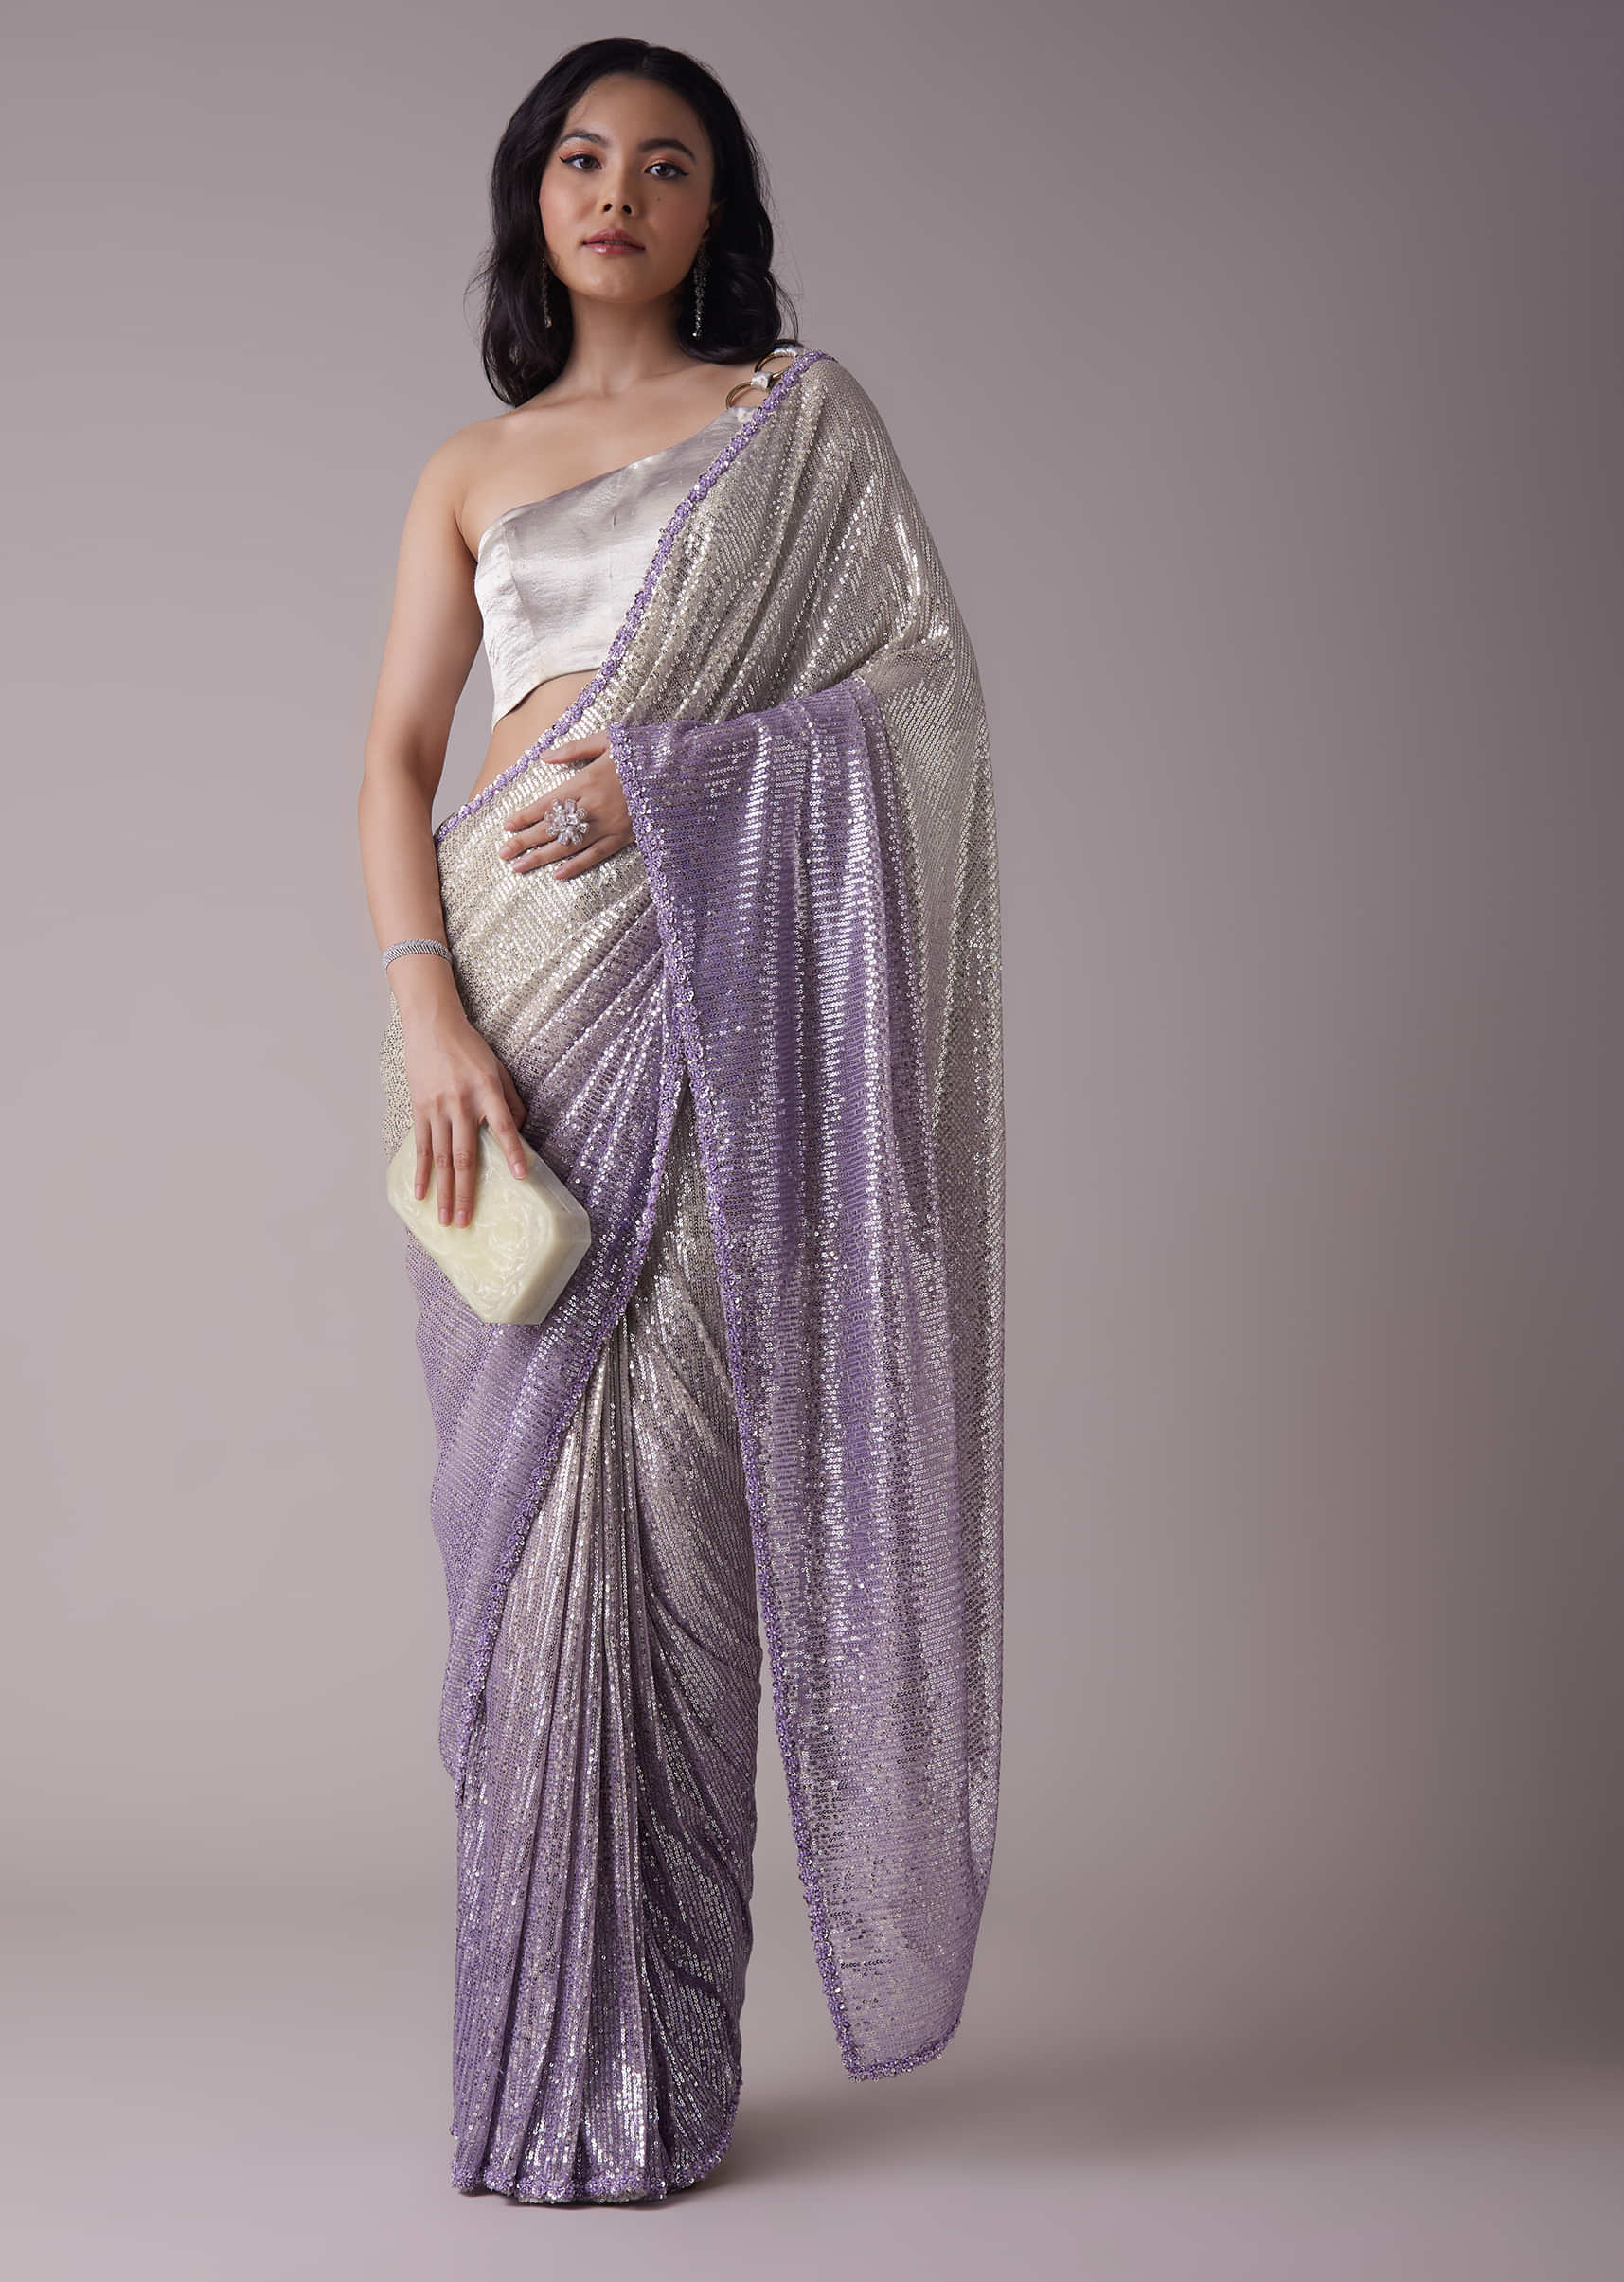 Lavender Purple Ombre Sequins Saree With An Embellished Border